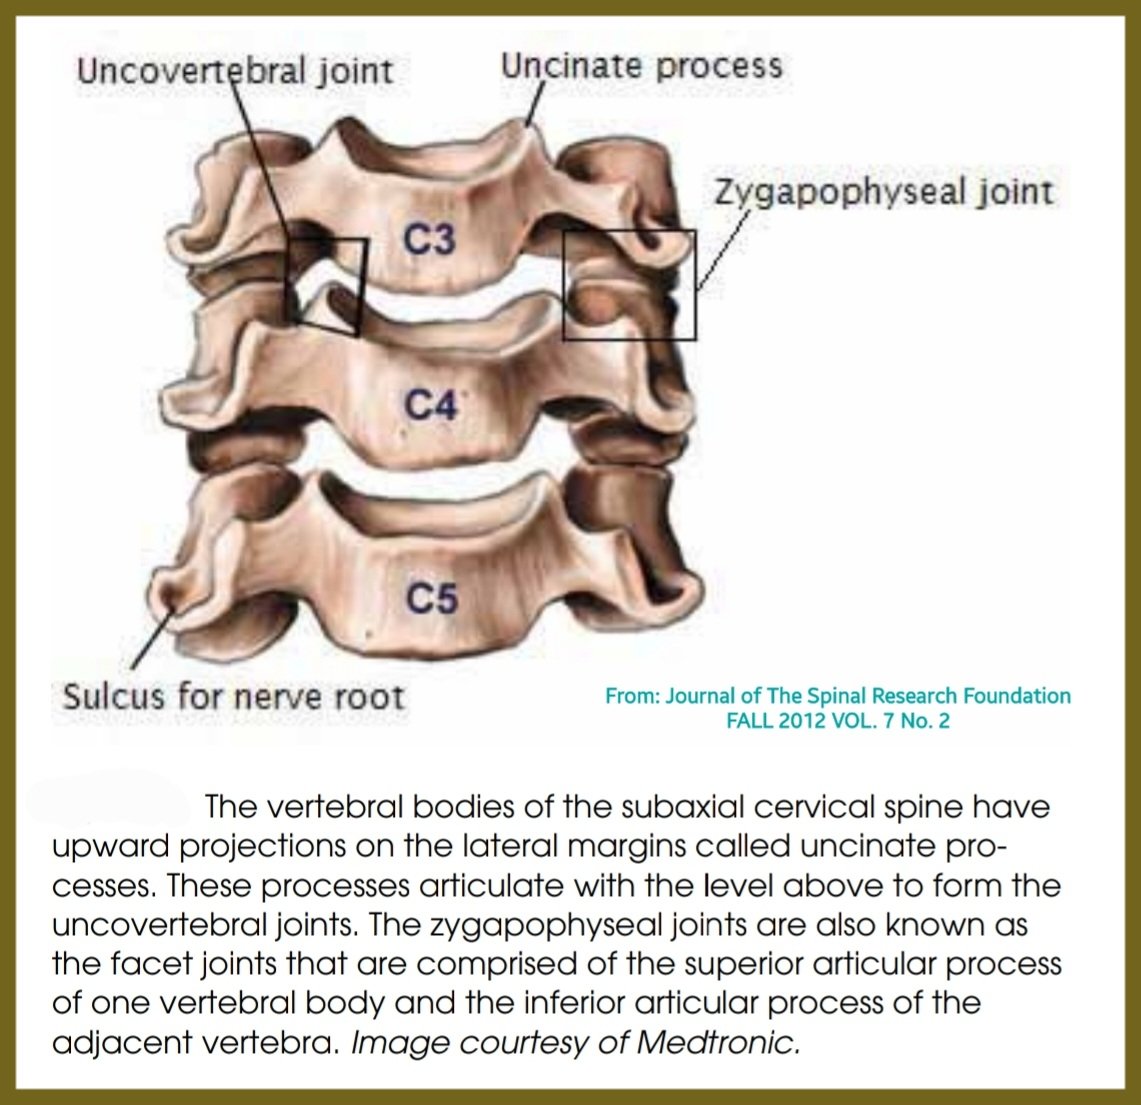 Movement of C-spine involves combination of uncovertebral & zygapophyseal motion. During neck flexion,zygapophyseal & uncovertebral joints glide in a combined superior,lateral& anterior direction. During neck extension, joints glide in a combined inferior,medial&post direction